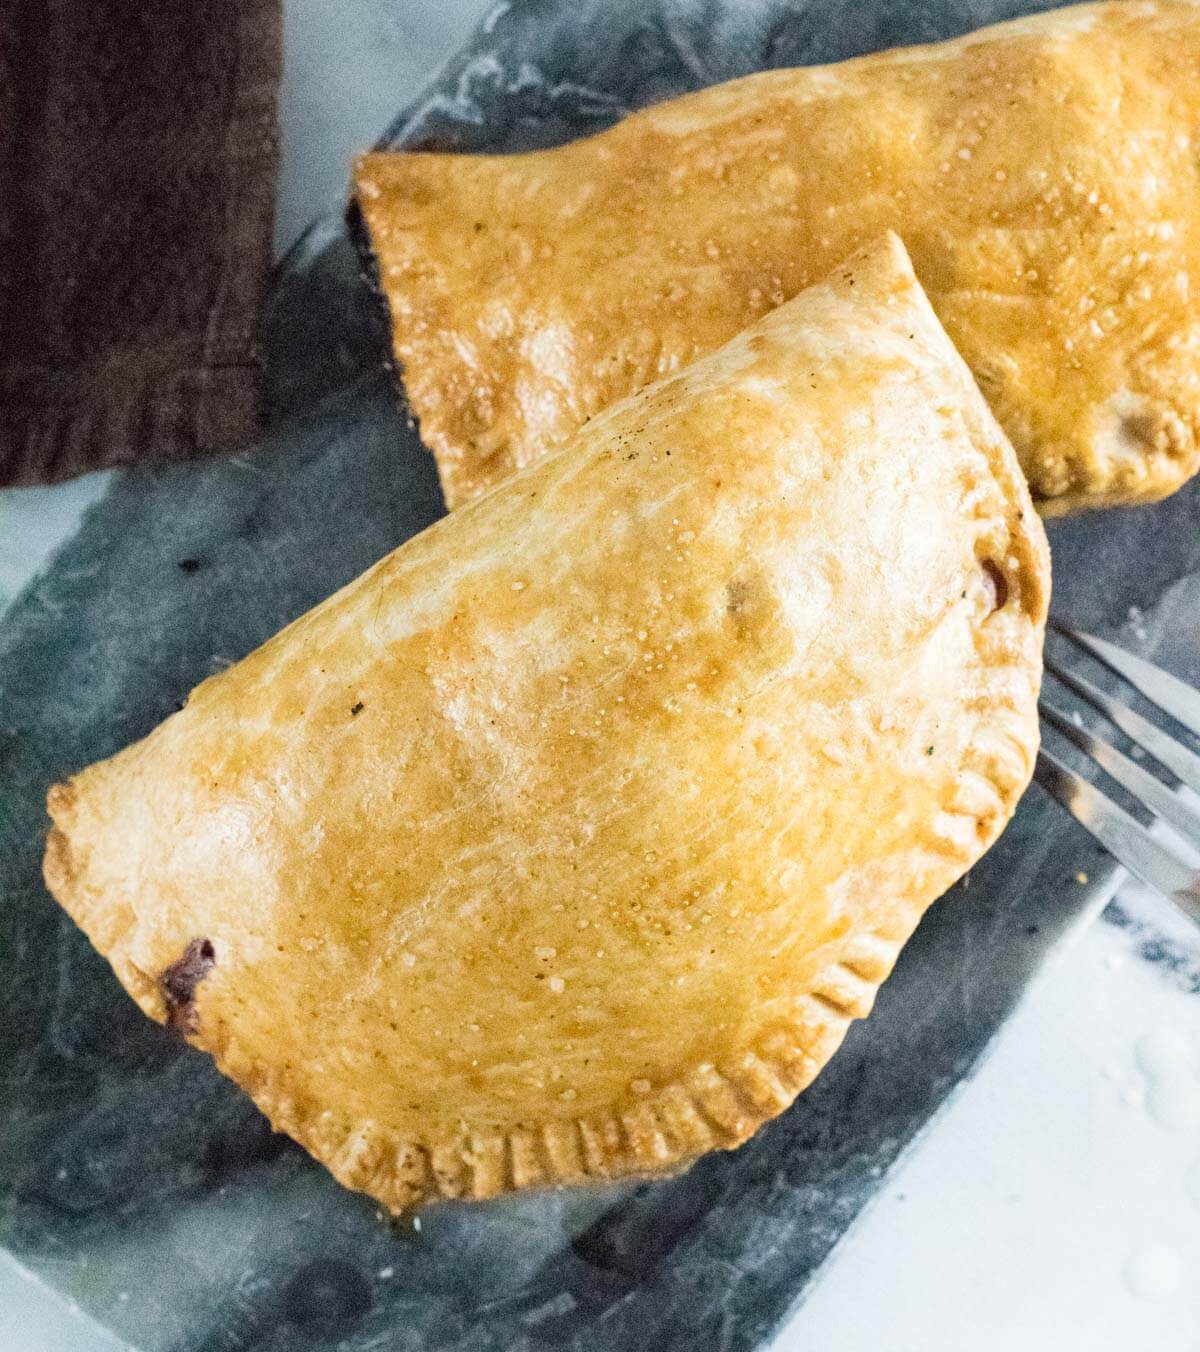 Two Cornish pasties shown from above.